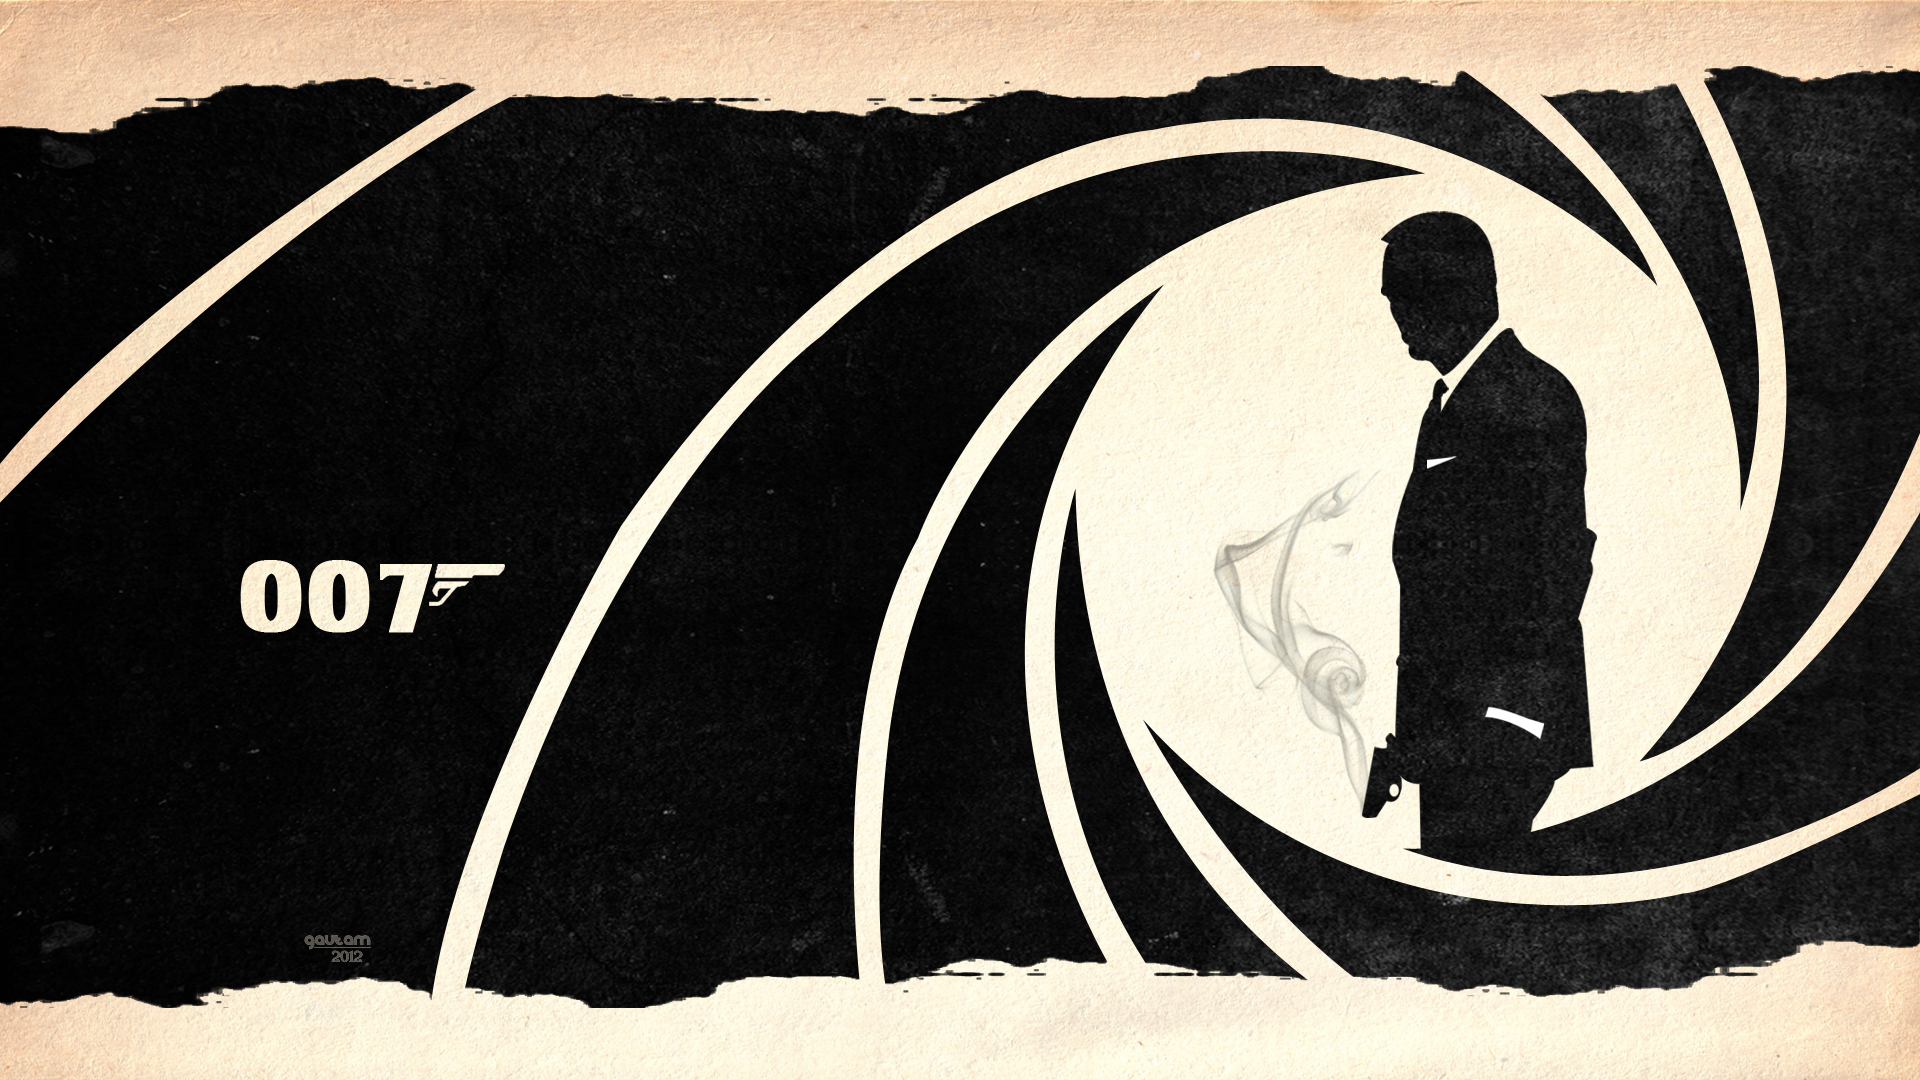 Stamps and Wallpapers on 007 Club - DeviantArt